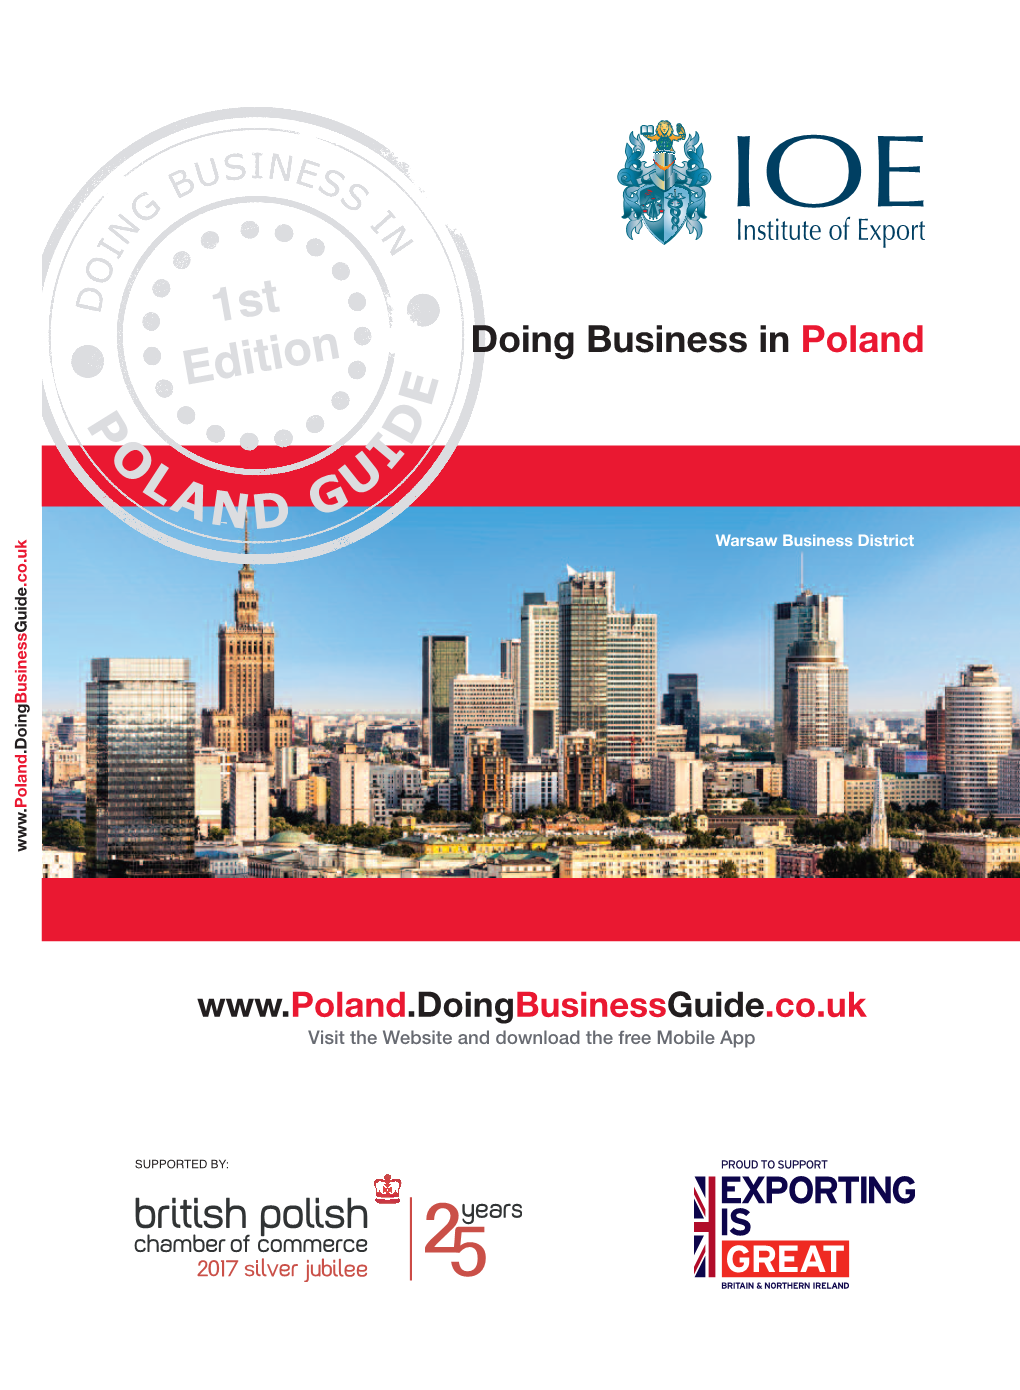 Doing Business in Poland Guide Will Help UK Businesses to Take a Look at This Growing European Market